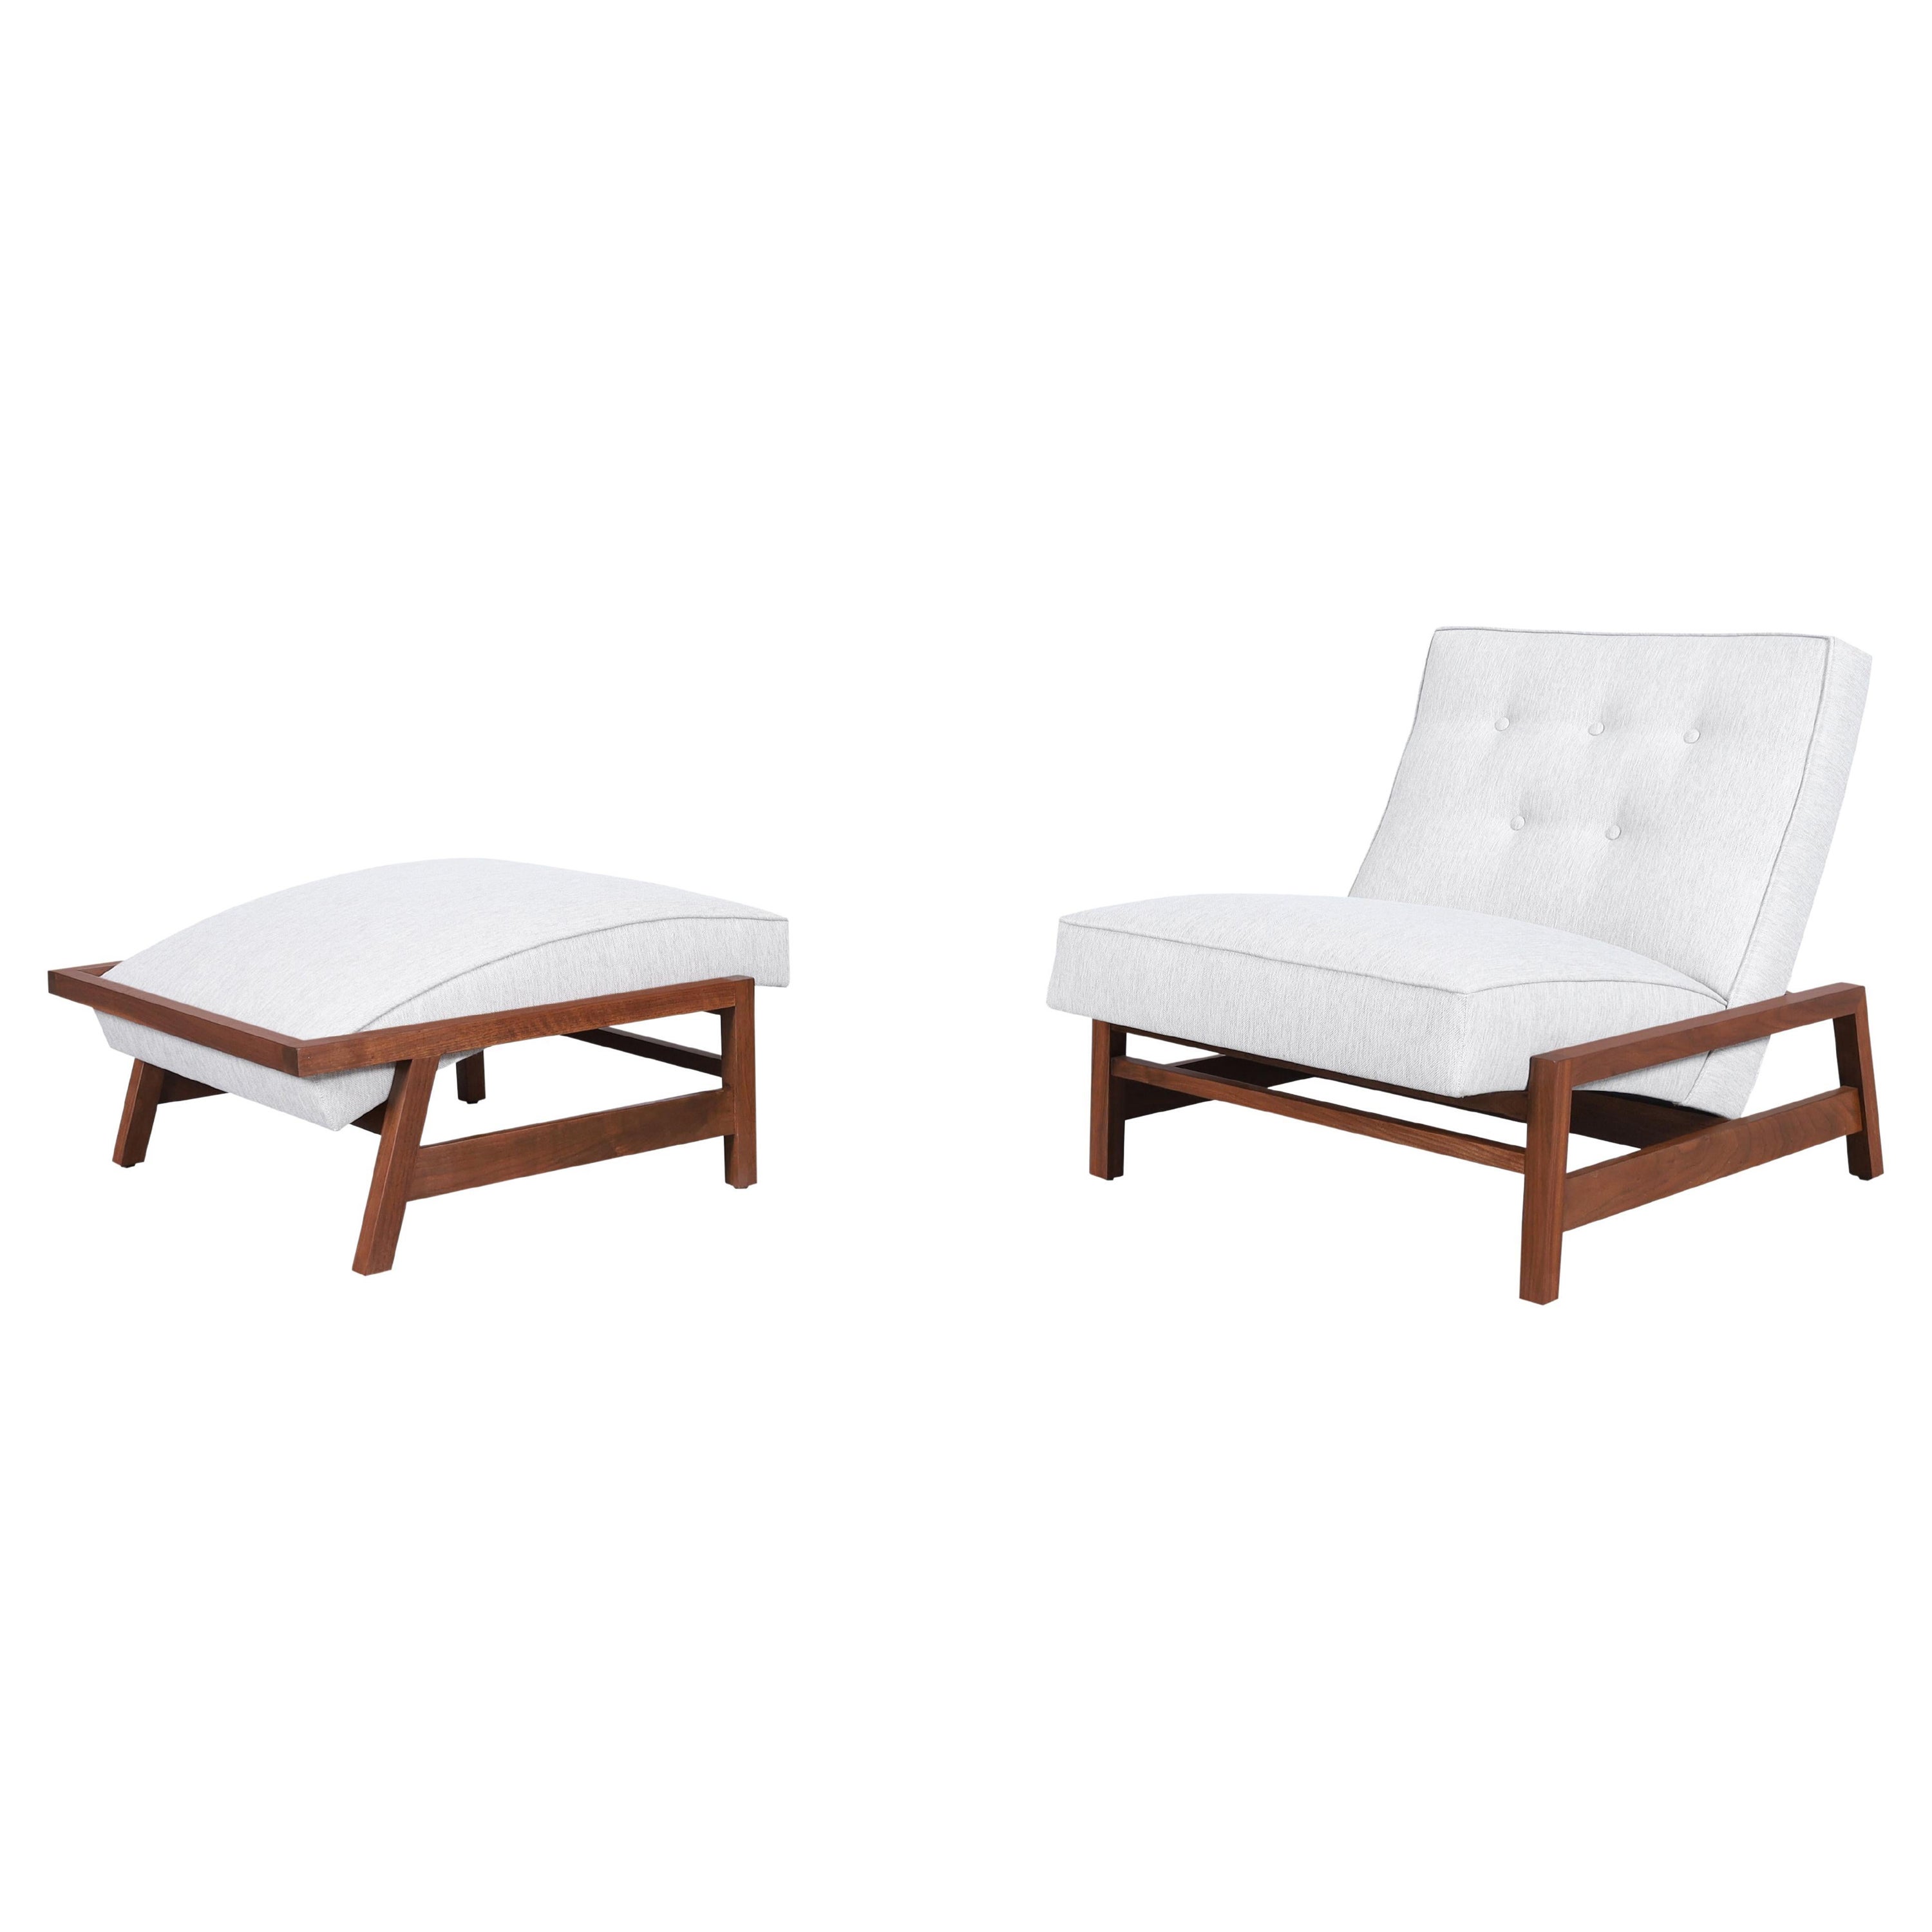 Mid-Century Walnut Lounge Chair and Ottoman Styled After Tobia Scarpa For Sale